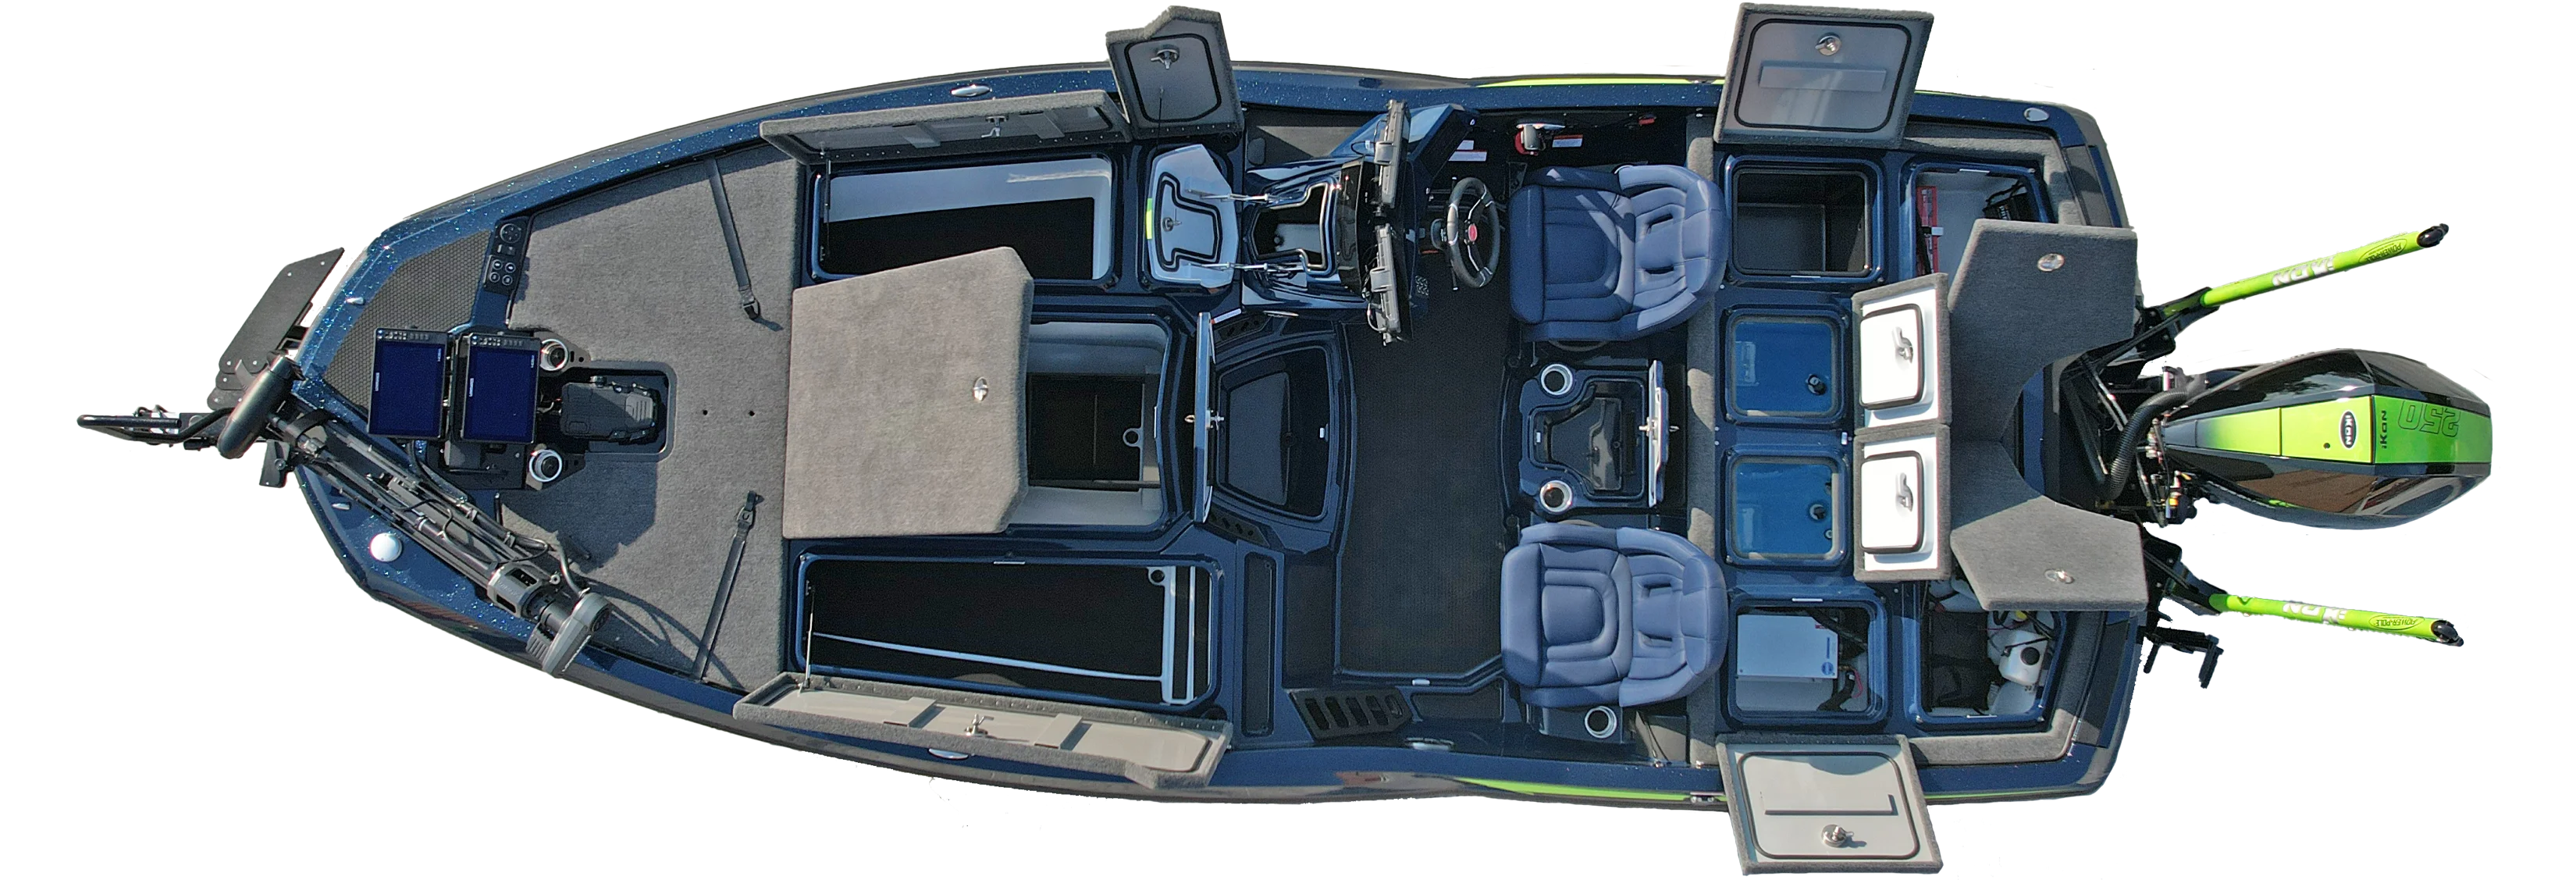 LX20 Bass Boat With All The Compartments Open